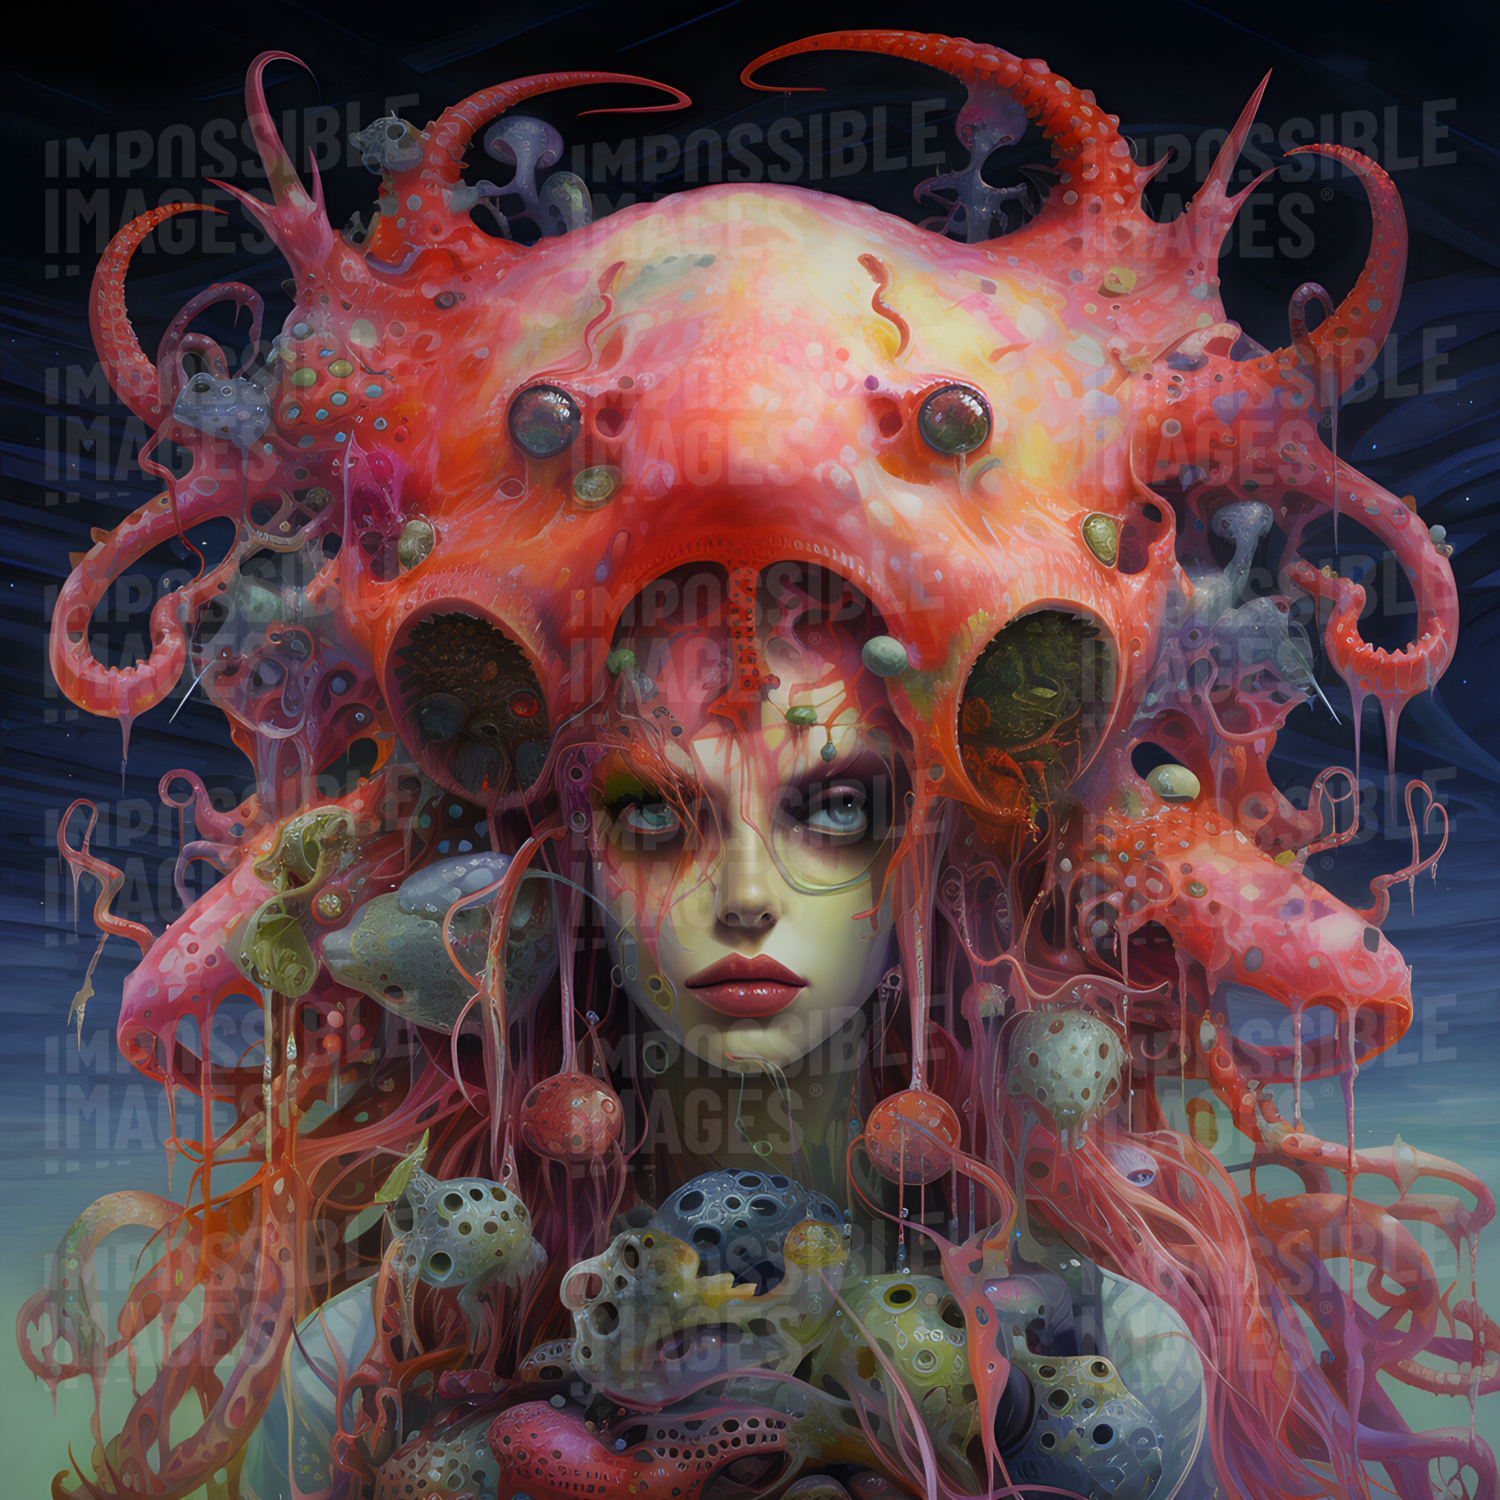 Conceptual image of a woman with an octopus-like helmet